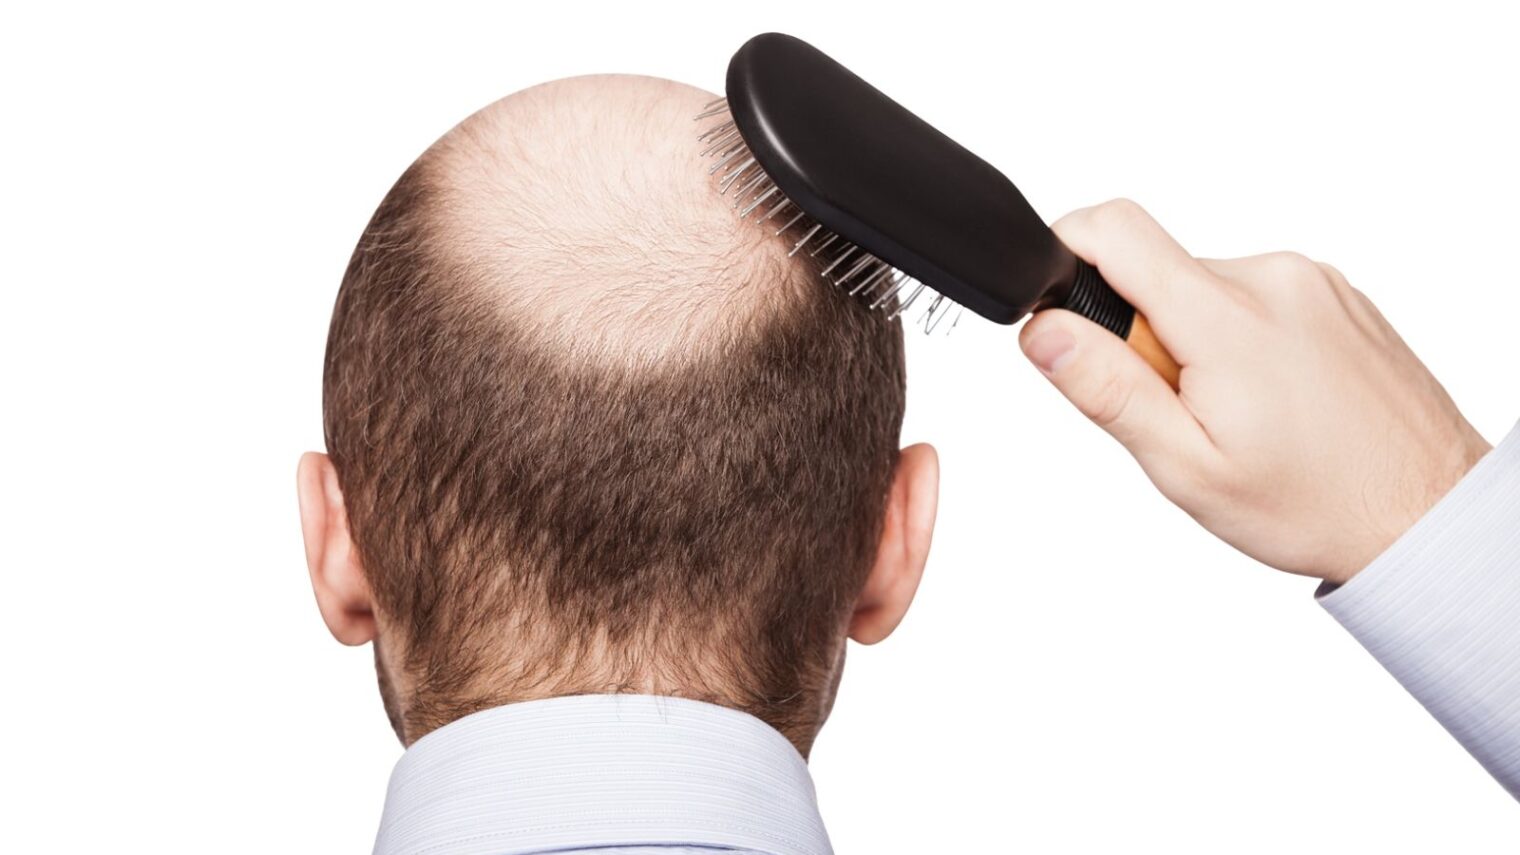 Cure for male baldness with no sexual side effects? - ISRAEL21c